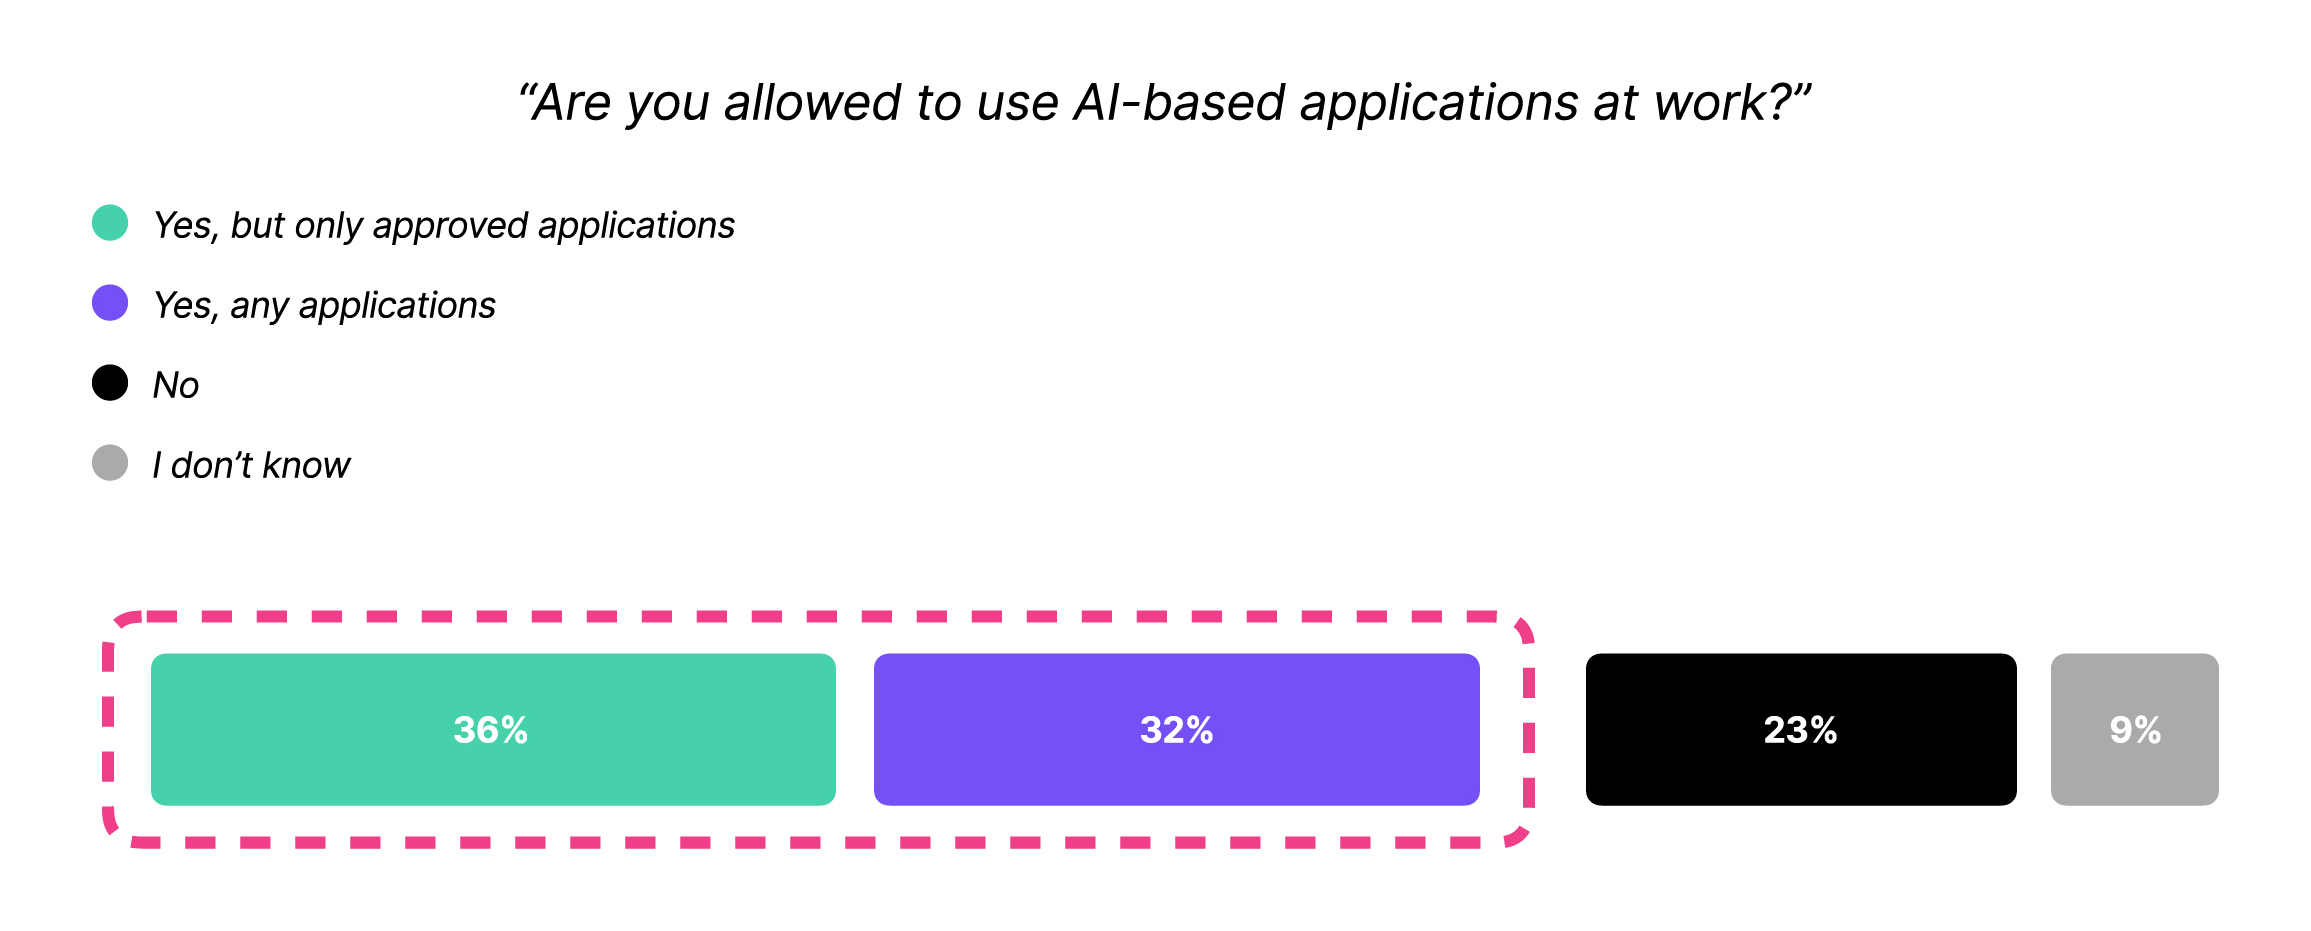 A graph from Kolide's Shadow IT report that asks "are you allowed to use AI-based applications at work?" with the results showing that yes, but only approved applications and yes, any applications lead the way summing up to 70% of respondents.